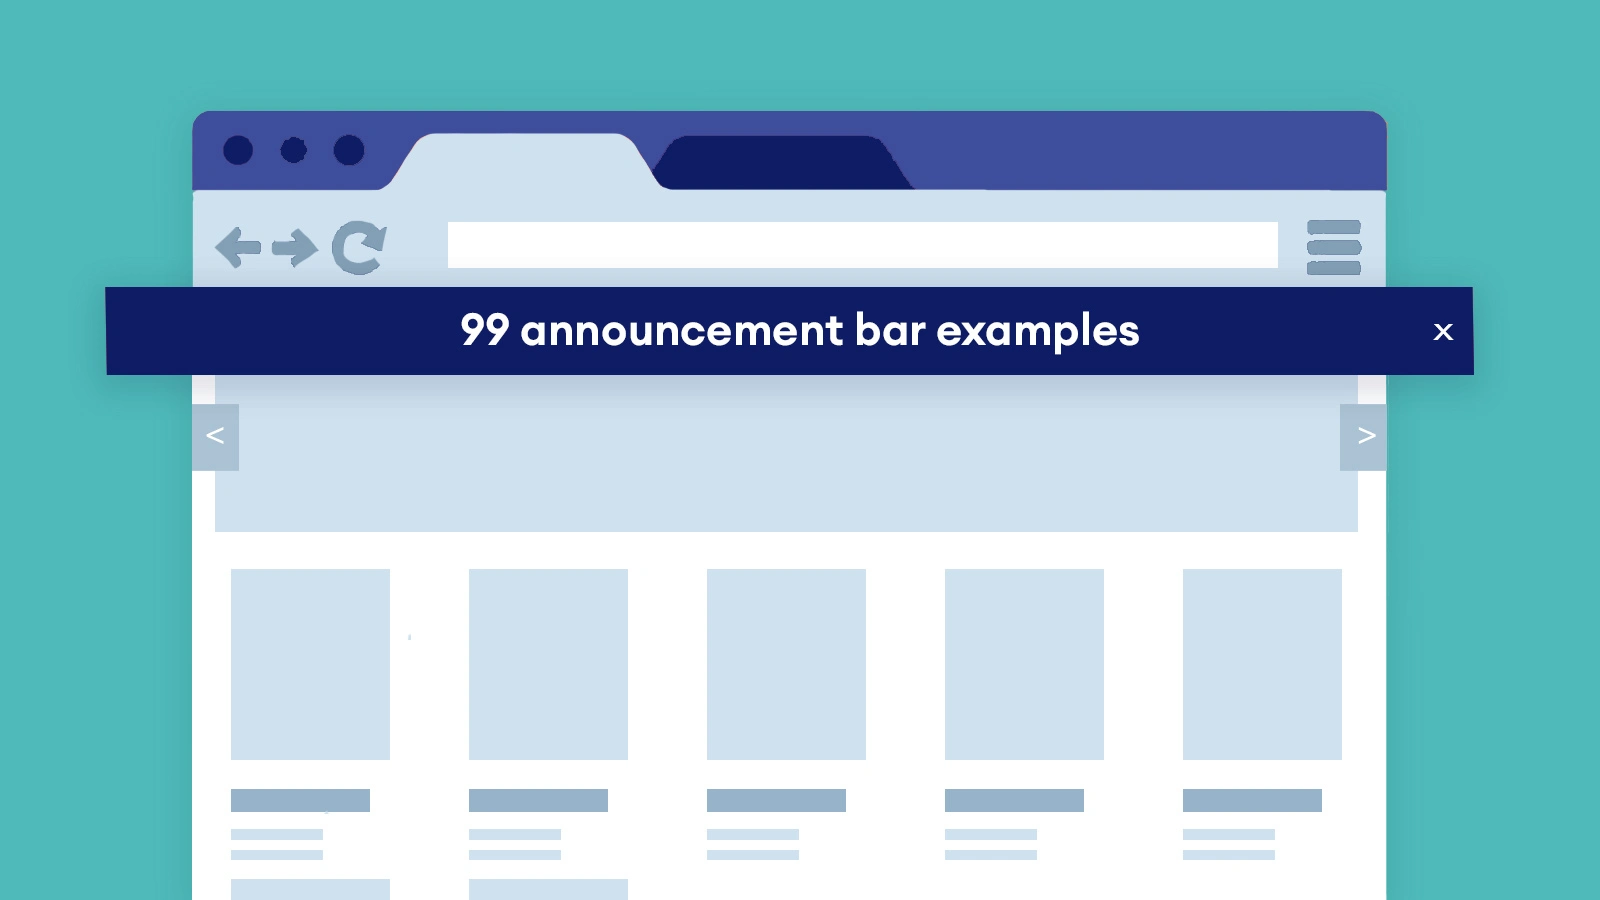 99 Announcement bar examples for websites